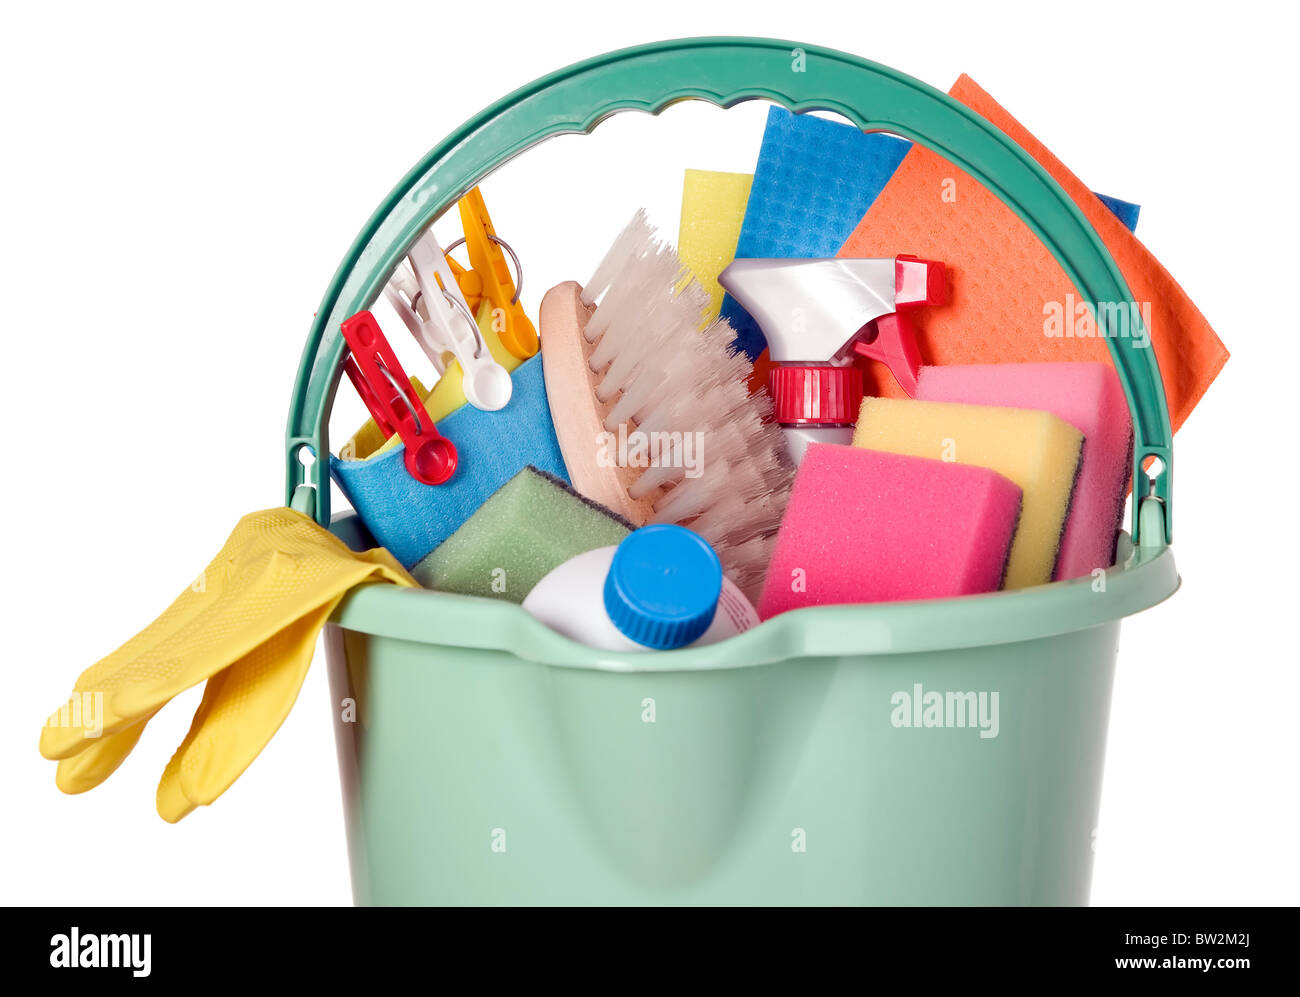 Bucket filled with cleaning industry tools, clean service Stock Photo